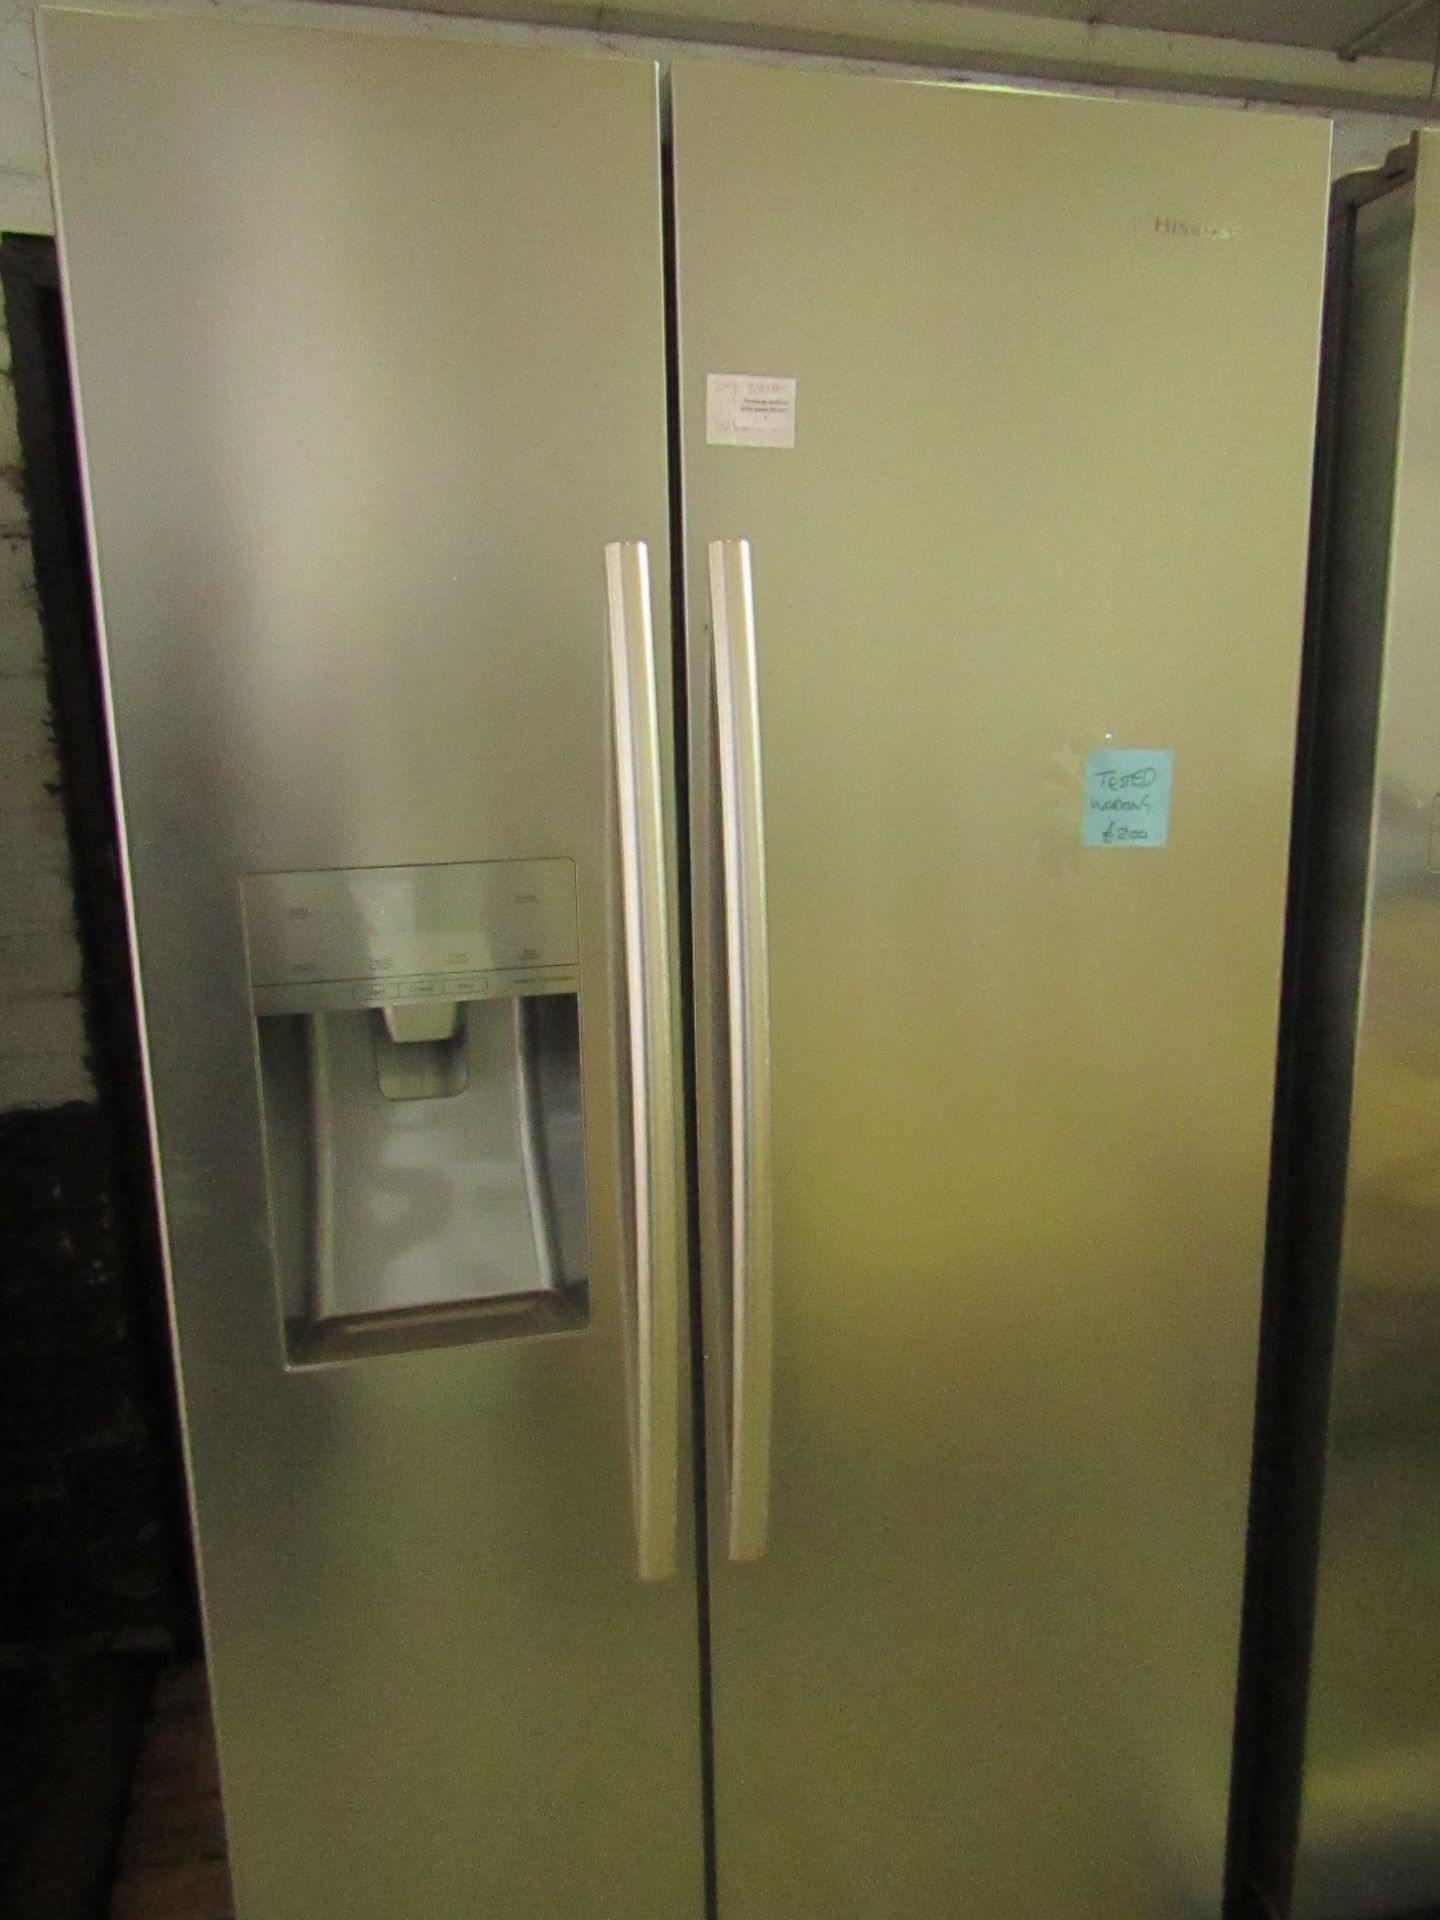 Hisense - Double Fridge Freezer - Tested Working in that It gets cold - Good Condition.